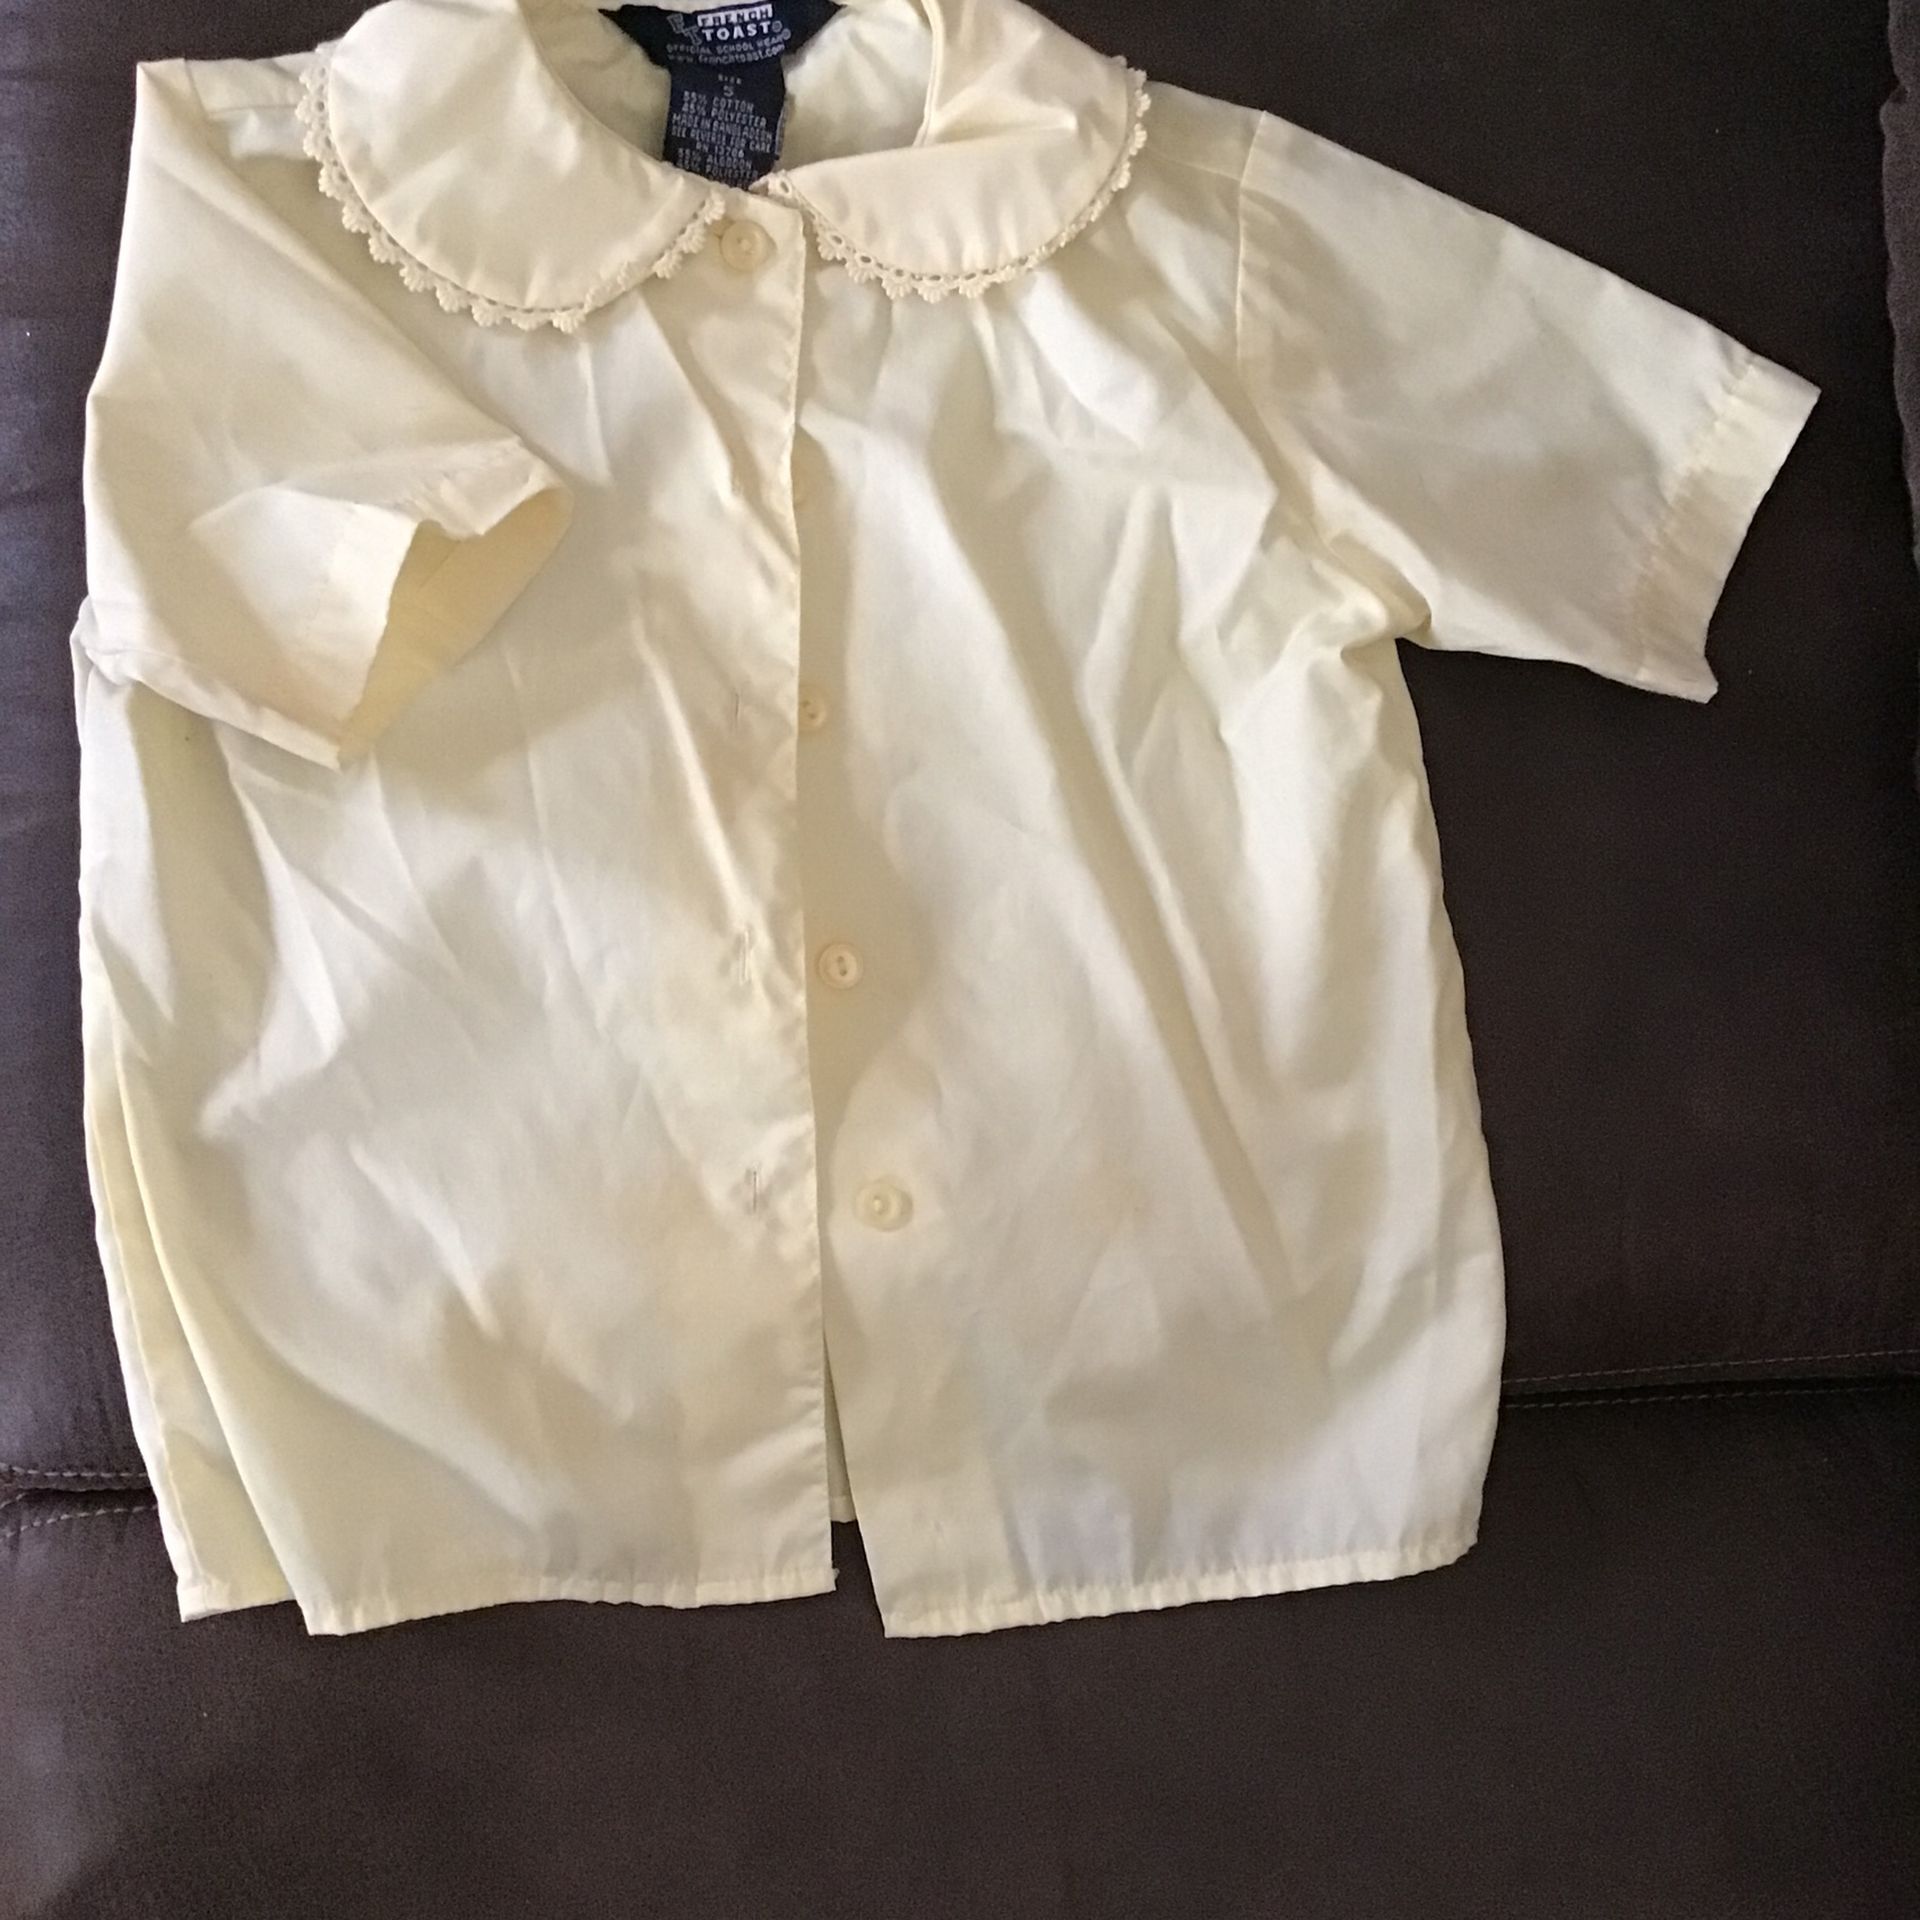 Size 5 Yellow Eyelet Round Neck Girls Uniform Shirt 4ct. For after Remote Learning